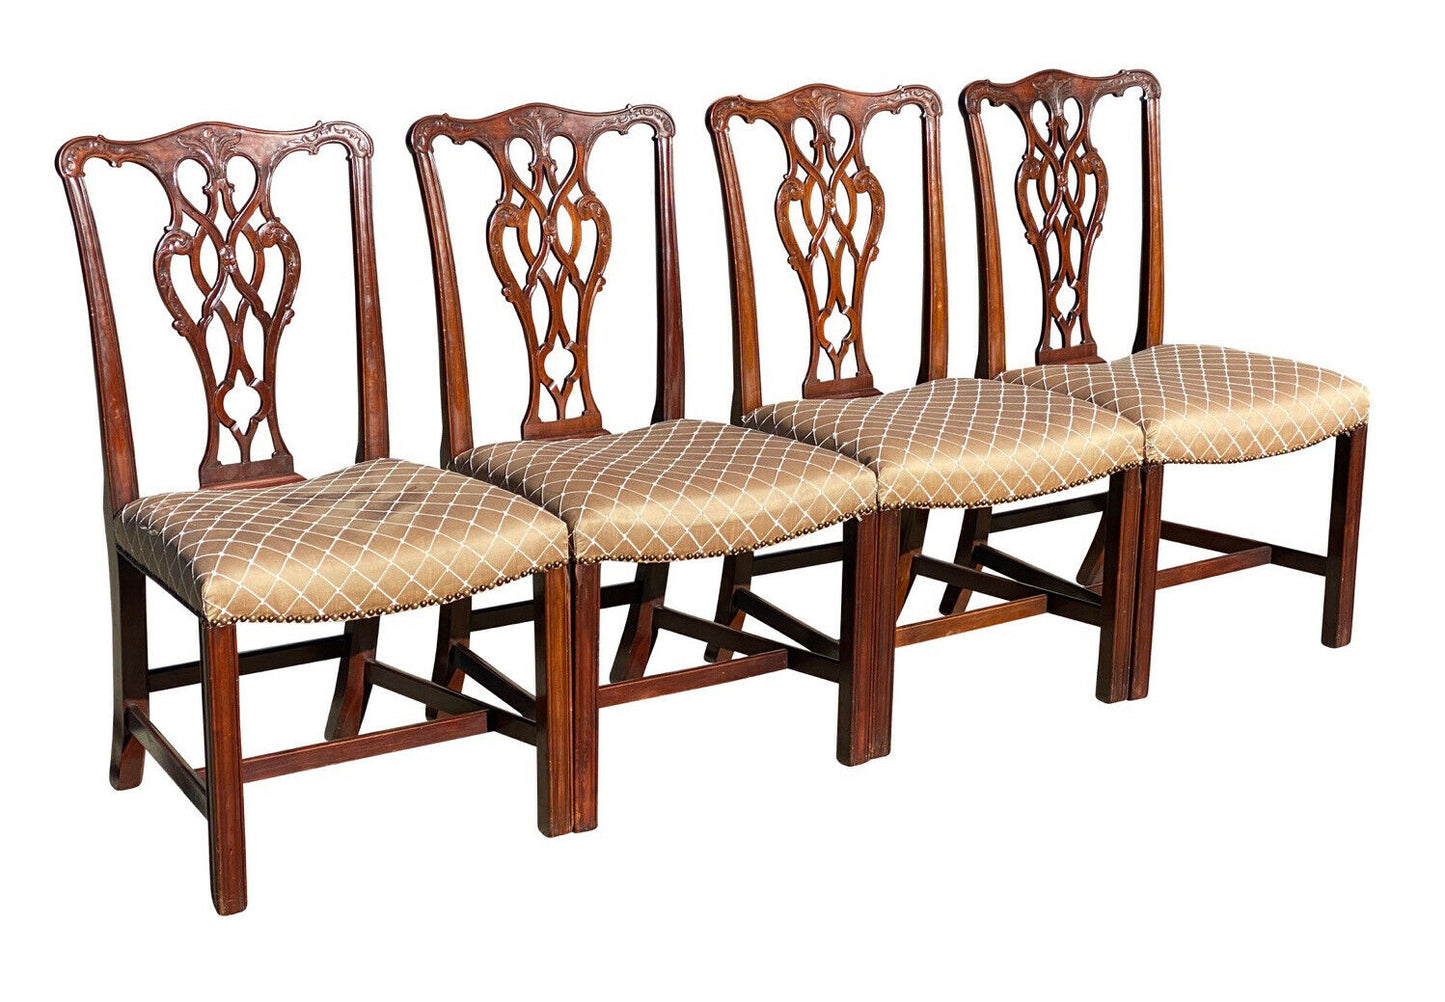 20TH C CHIPPENDALE ANTIQUE STYLE SET OF 8 CUSTOM MAHOGANY DINING CHAIRS